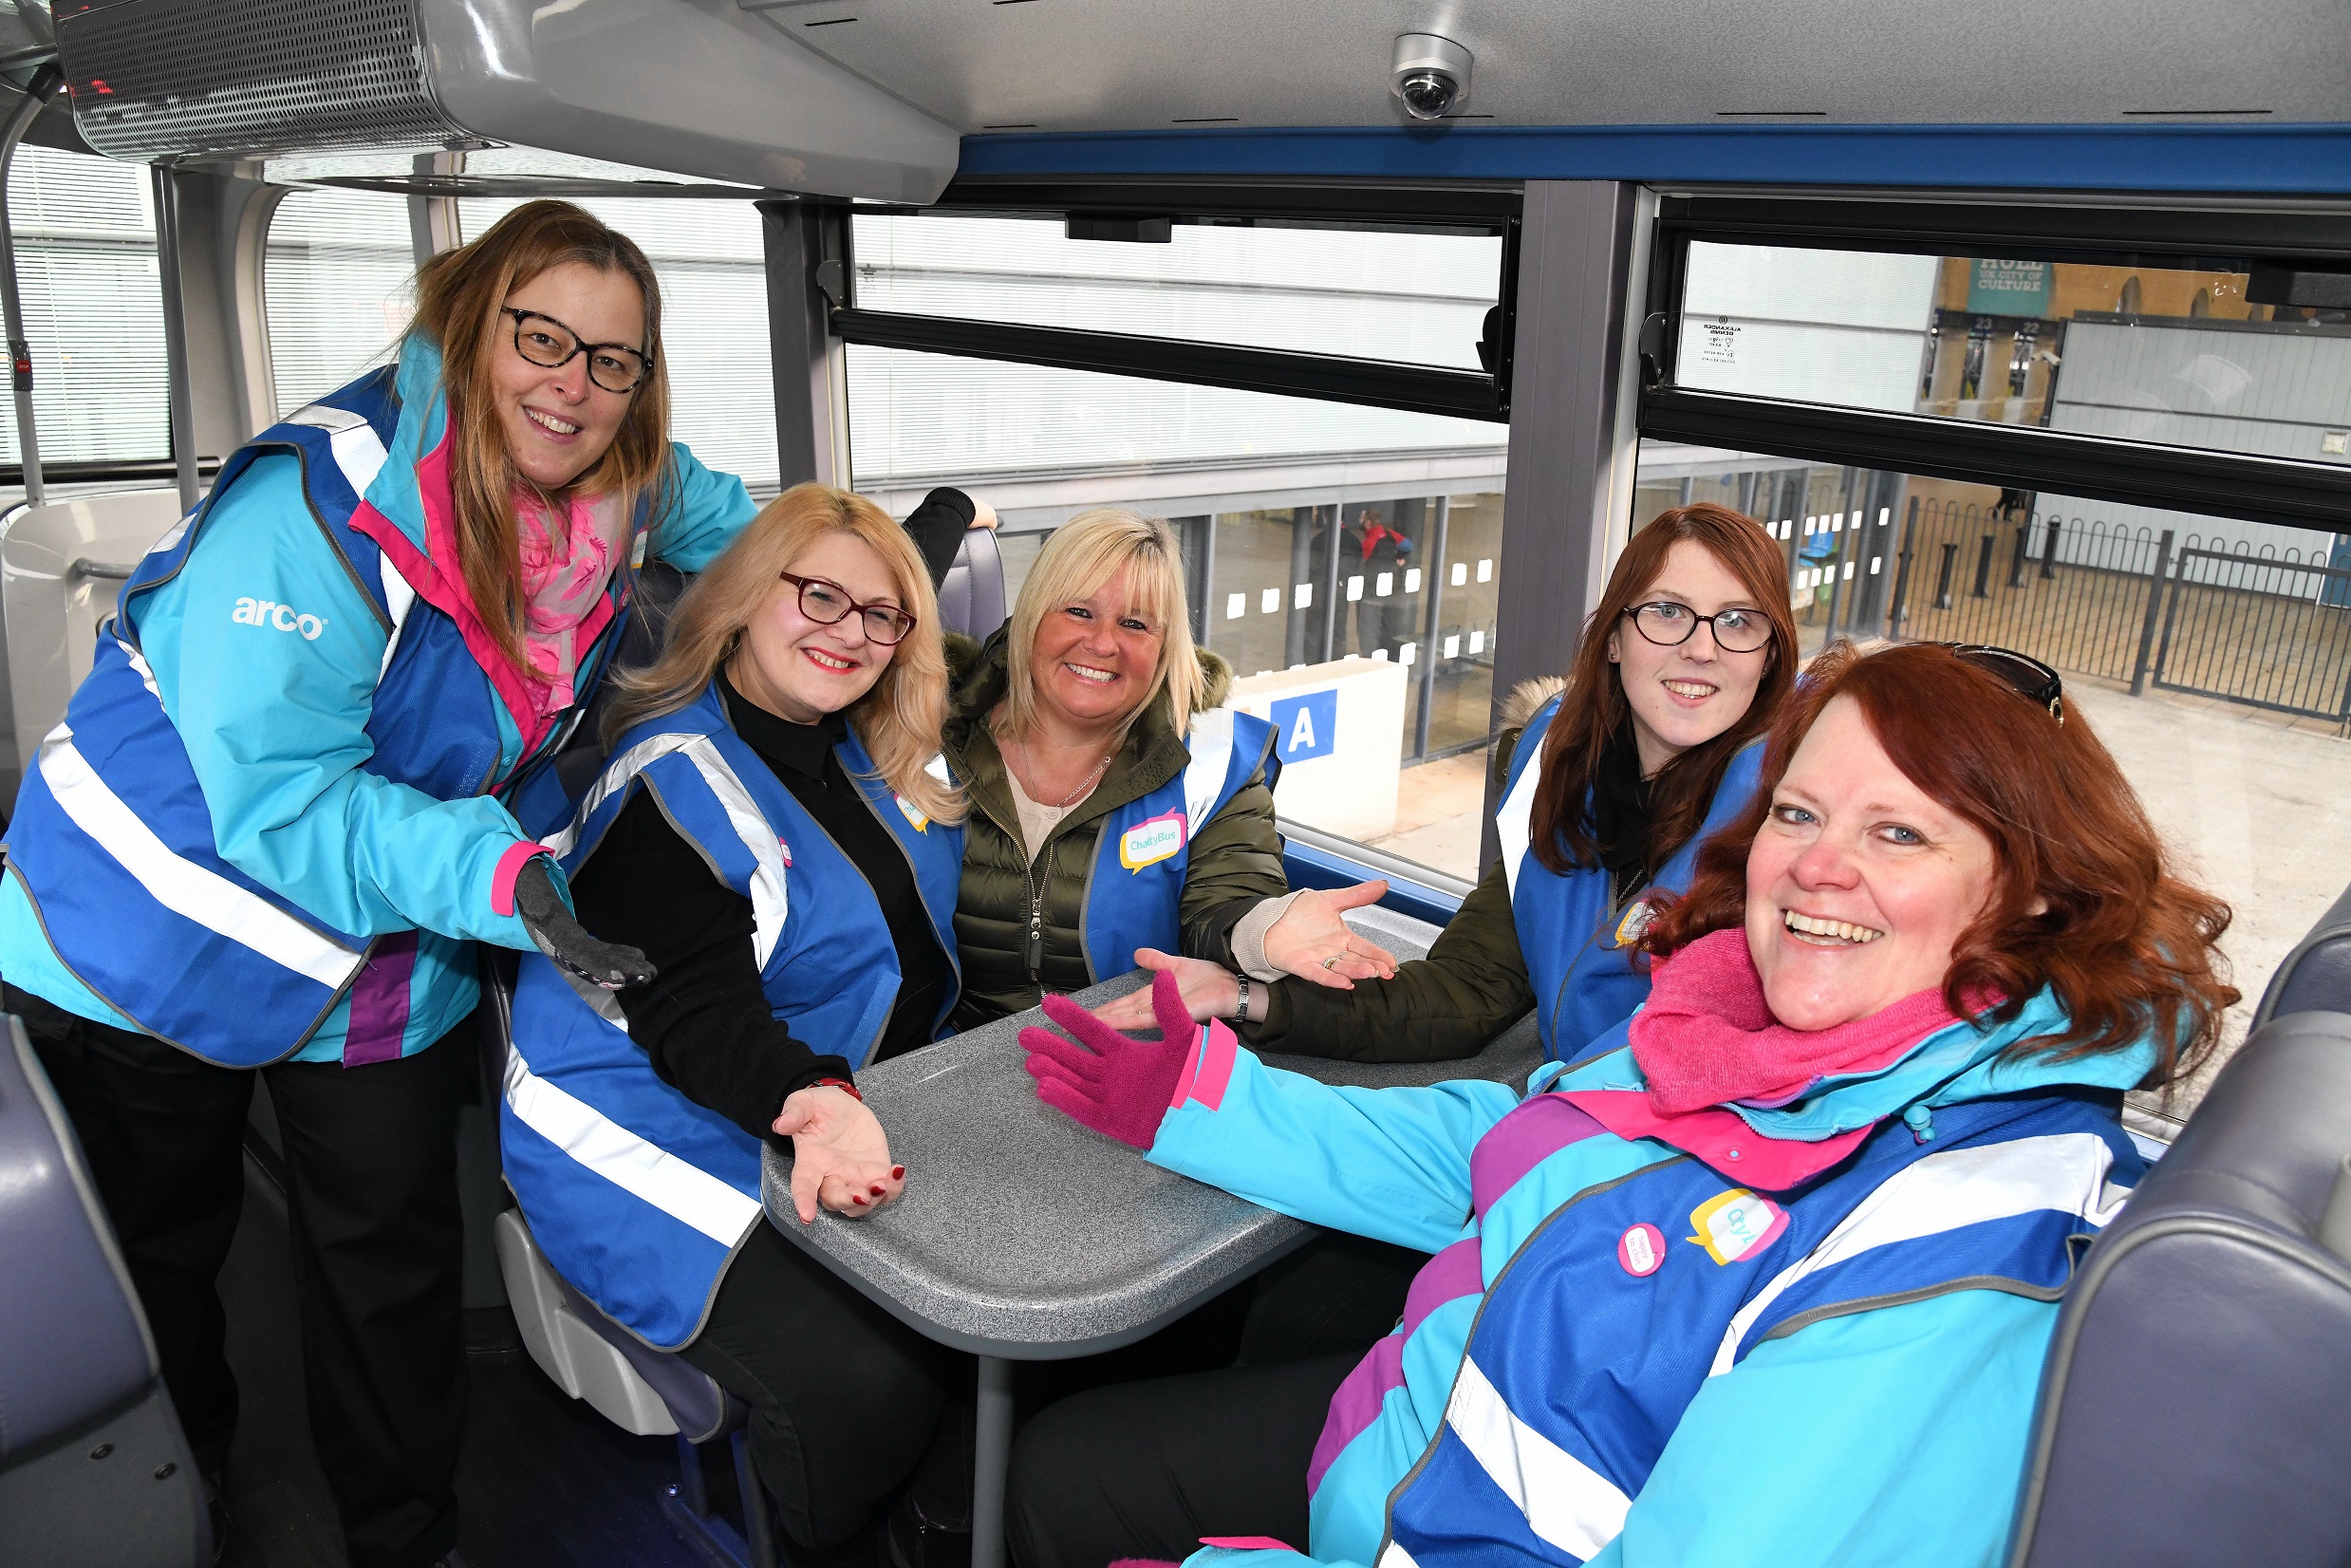 Five people in Chatty Bus clothing sit on a bus, smiling